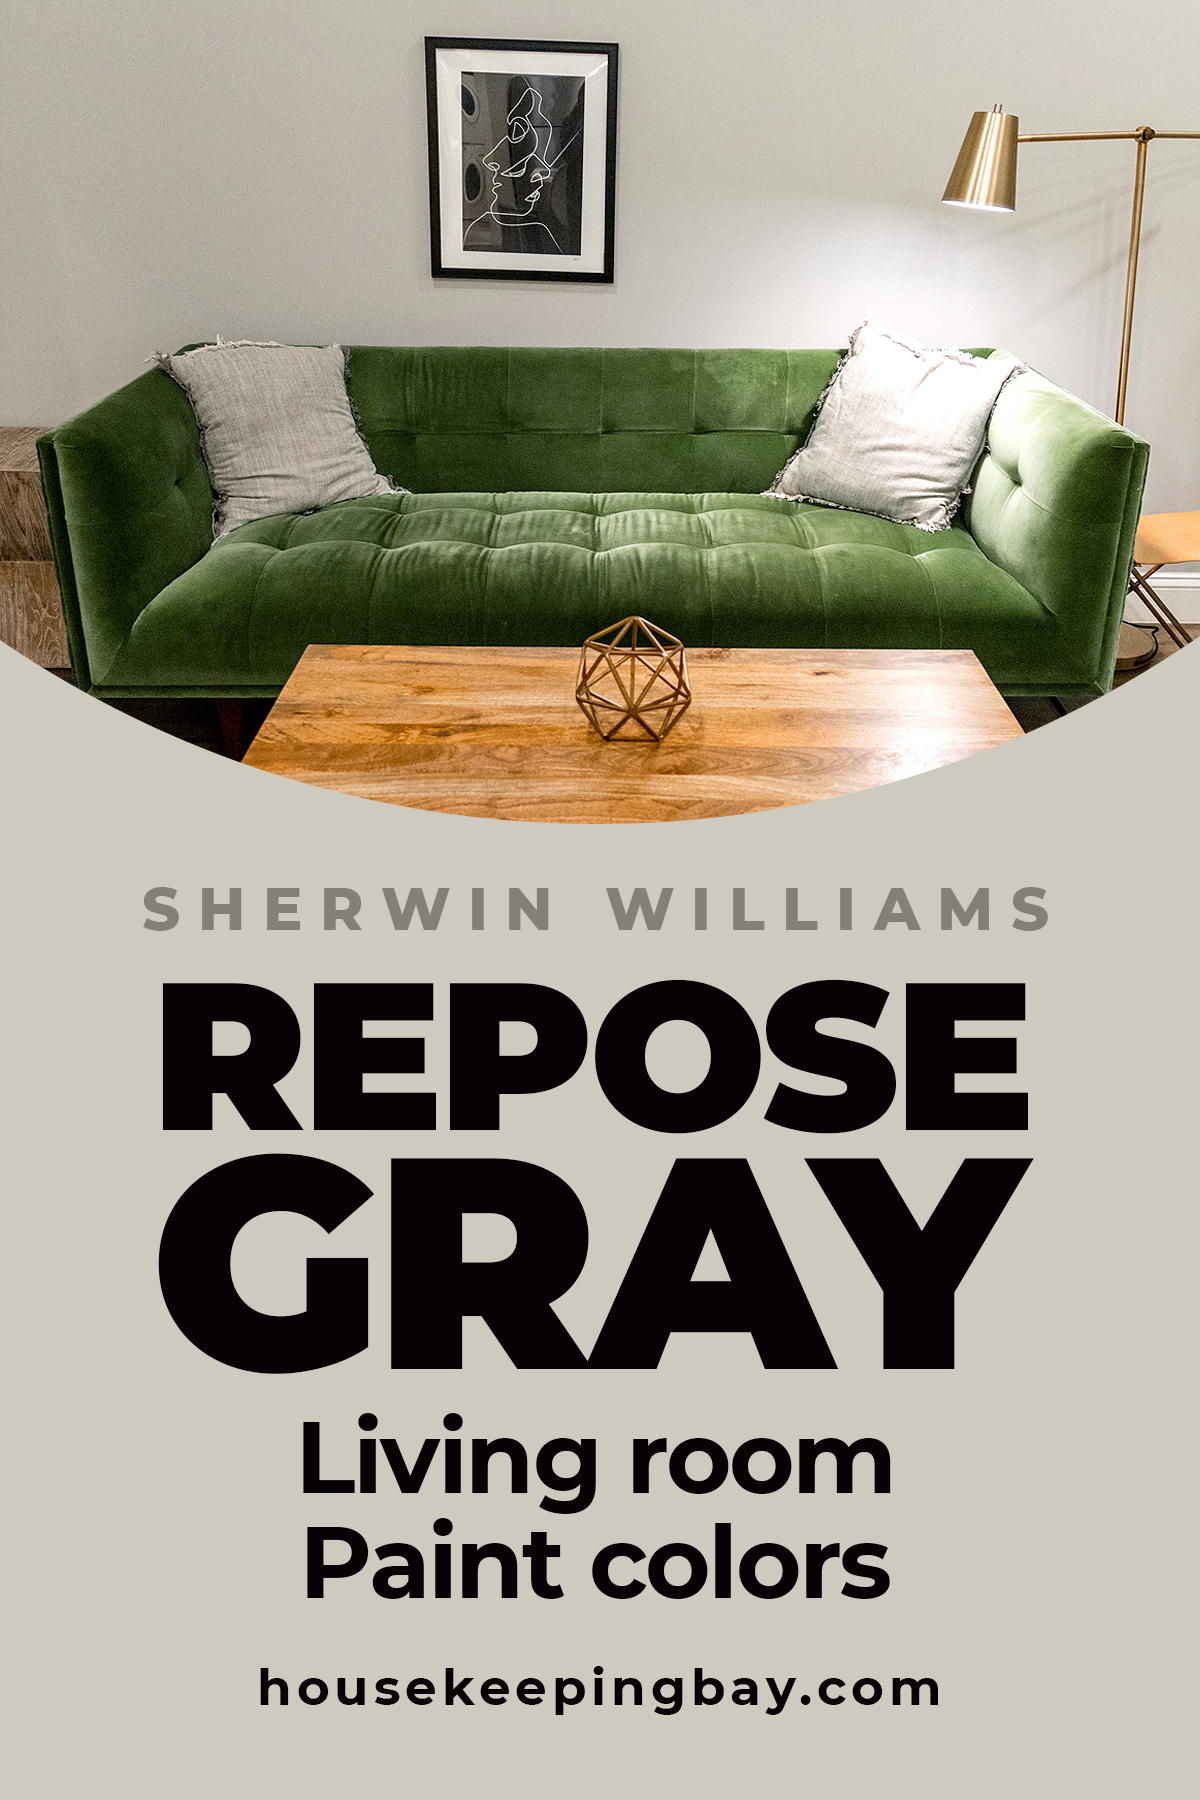 Repose Gray living room Paint colors